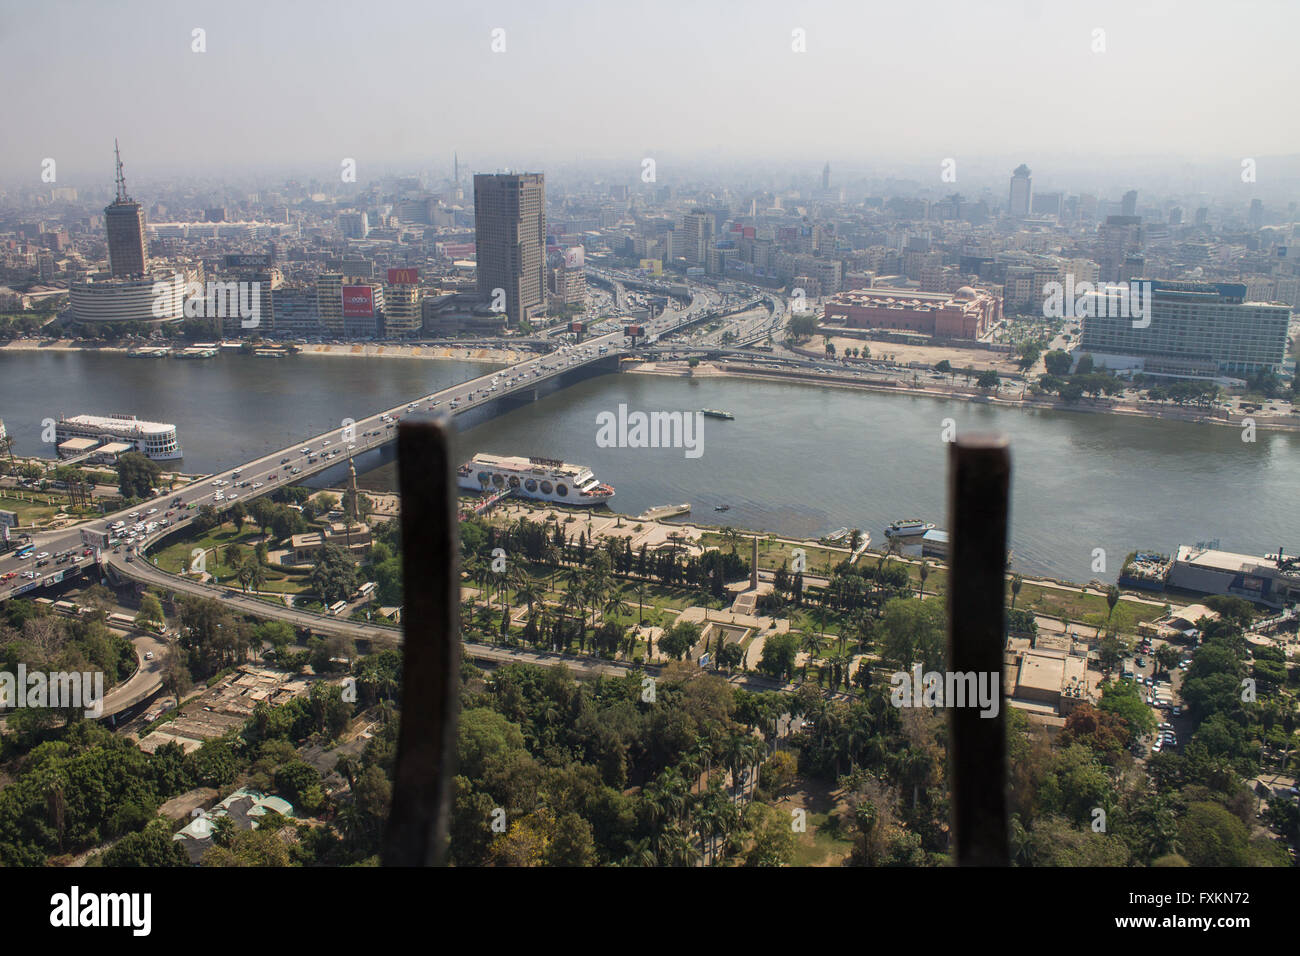 Cairo, Egypt. 16th Apr, 2016. Egypt from the top of the Cairo Tower.Abdel Moneim Riad area leading to Tahrir Square, Ramses Hilton Hotel, the Nile River, the building of the radio and television - Maspero.Traffic congestion in the Greater Cairo - Egyptian Nile River from the top of the Cairo Tower, which is witnessing a crisis in low water levels after the construction of the Renaissance Dam Ethiopia © Fayed El-Geziry/ZUMA Wire/Alamy Live News Stock Photo